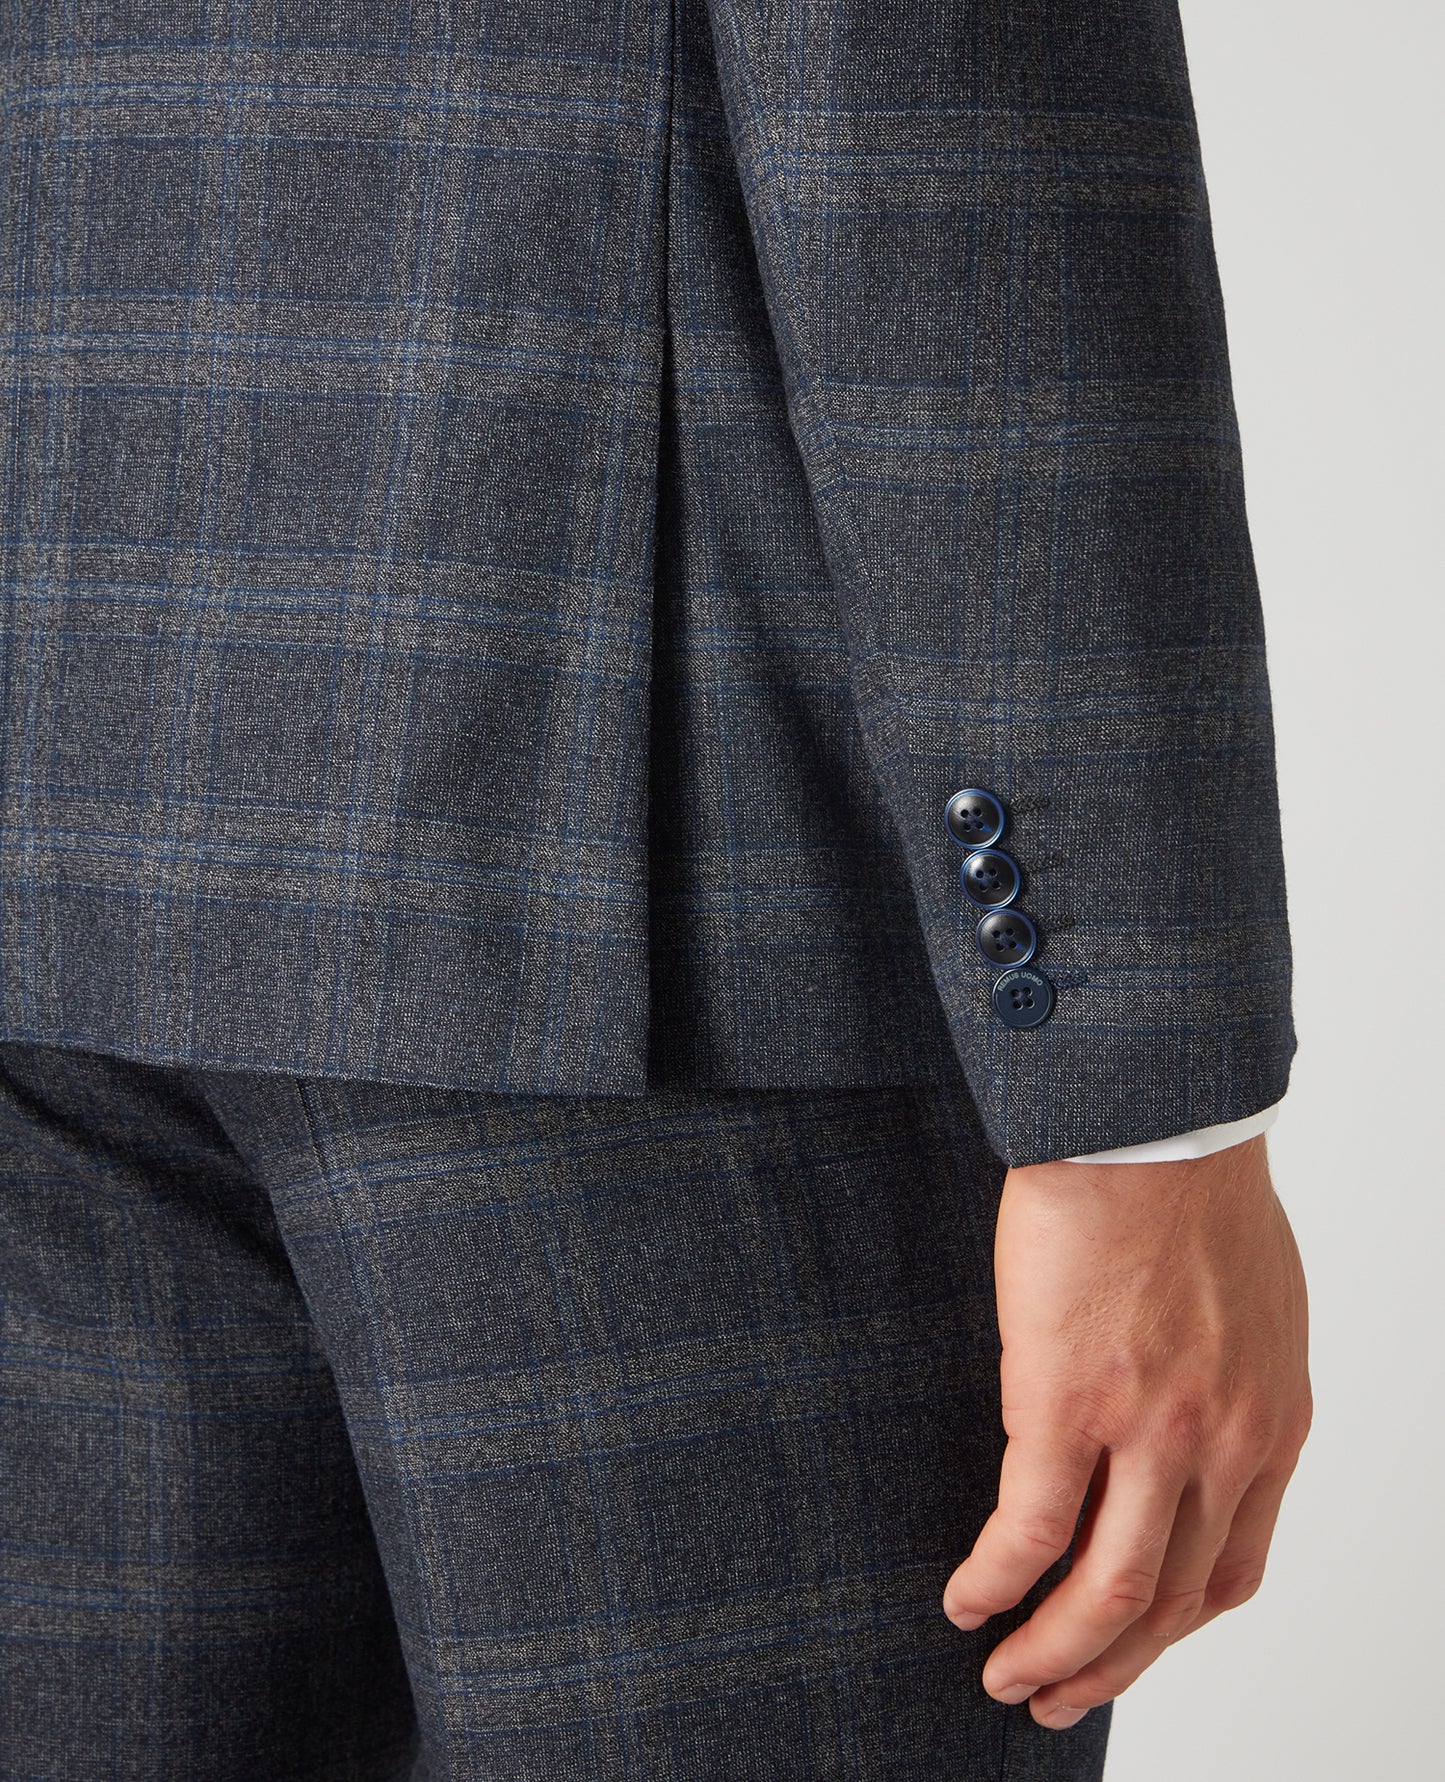 Remus Uomo Mix & Match Suit Trousers